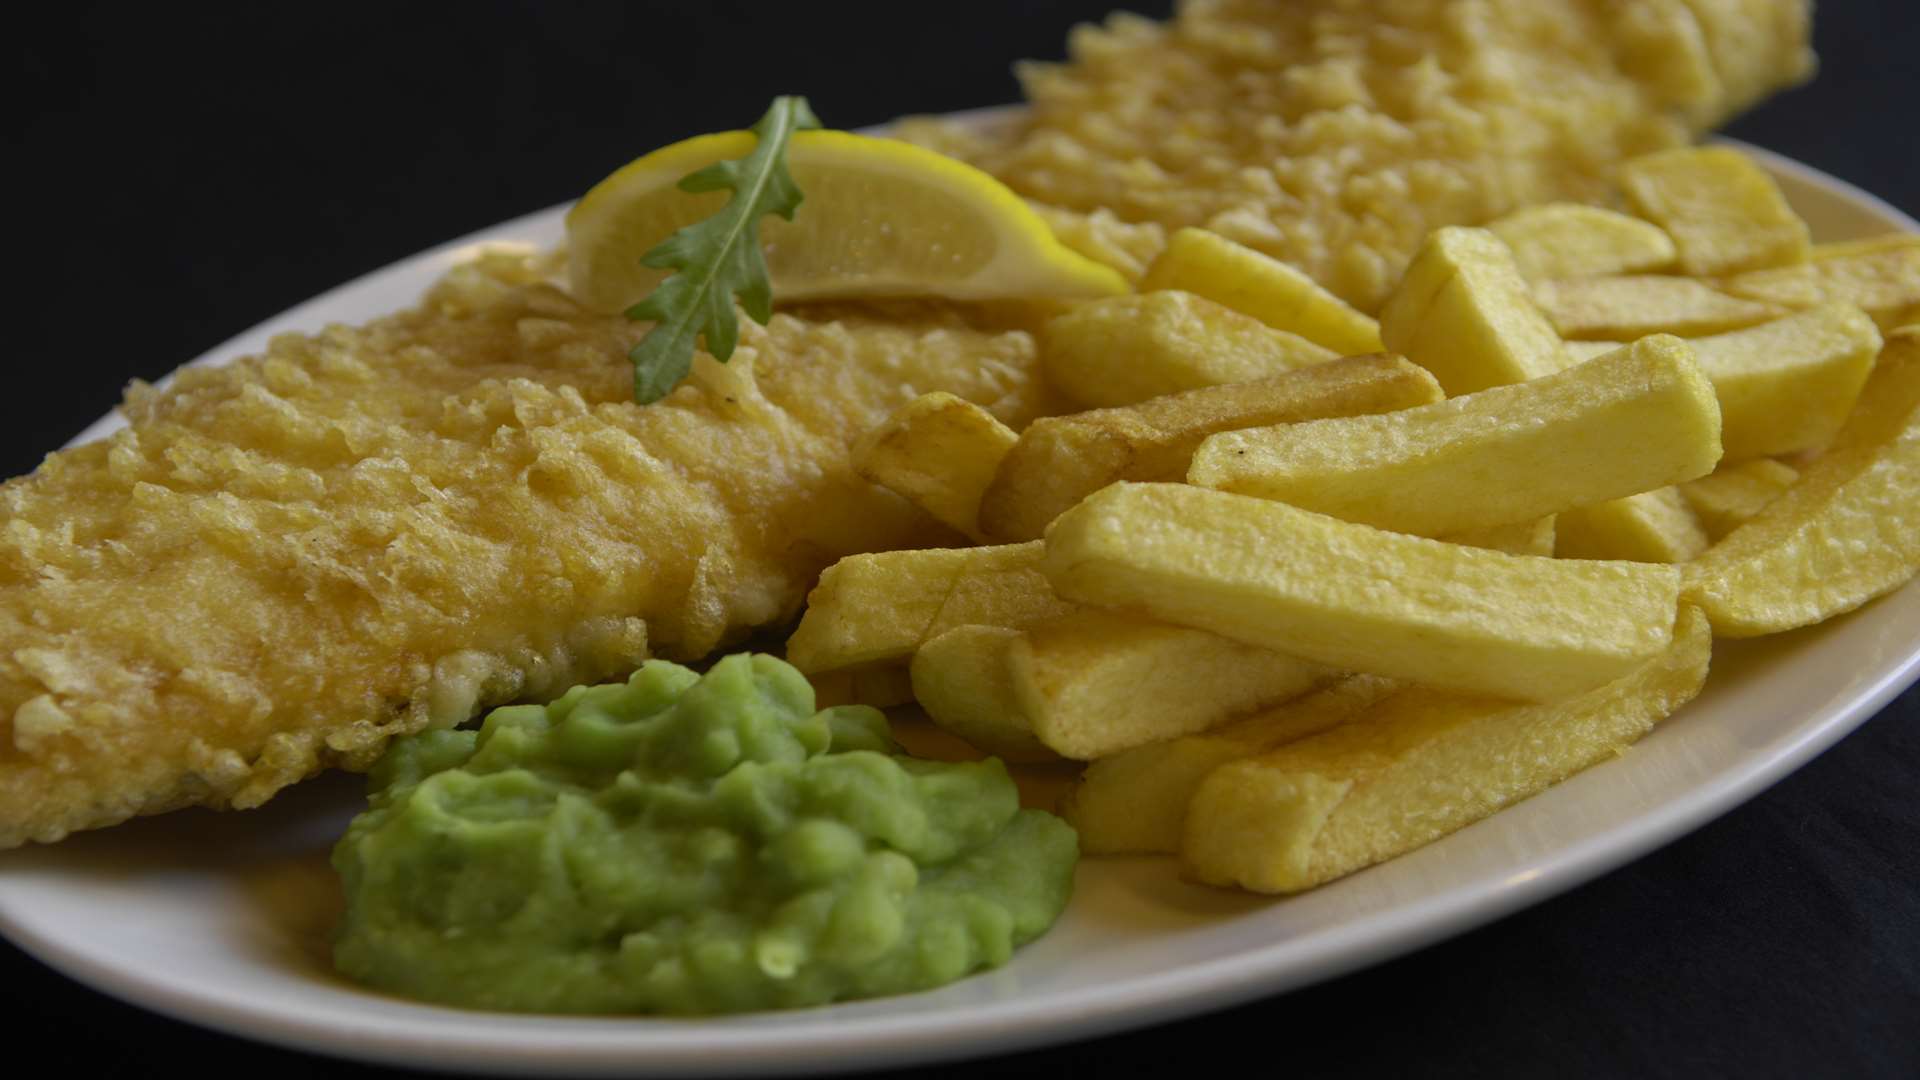 Don't miss the fish and chips at The Pilot